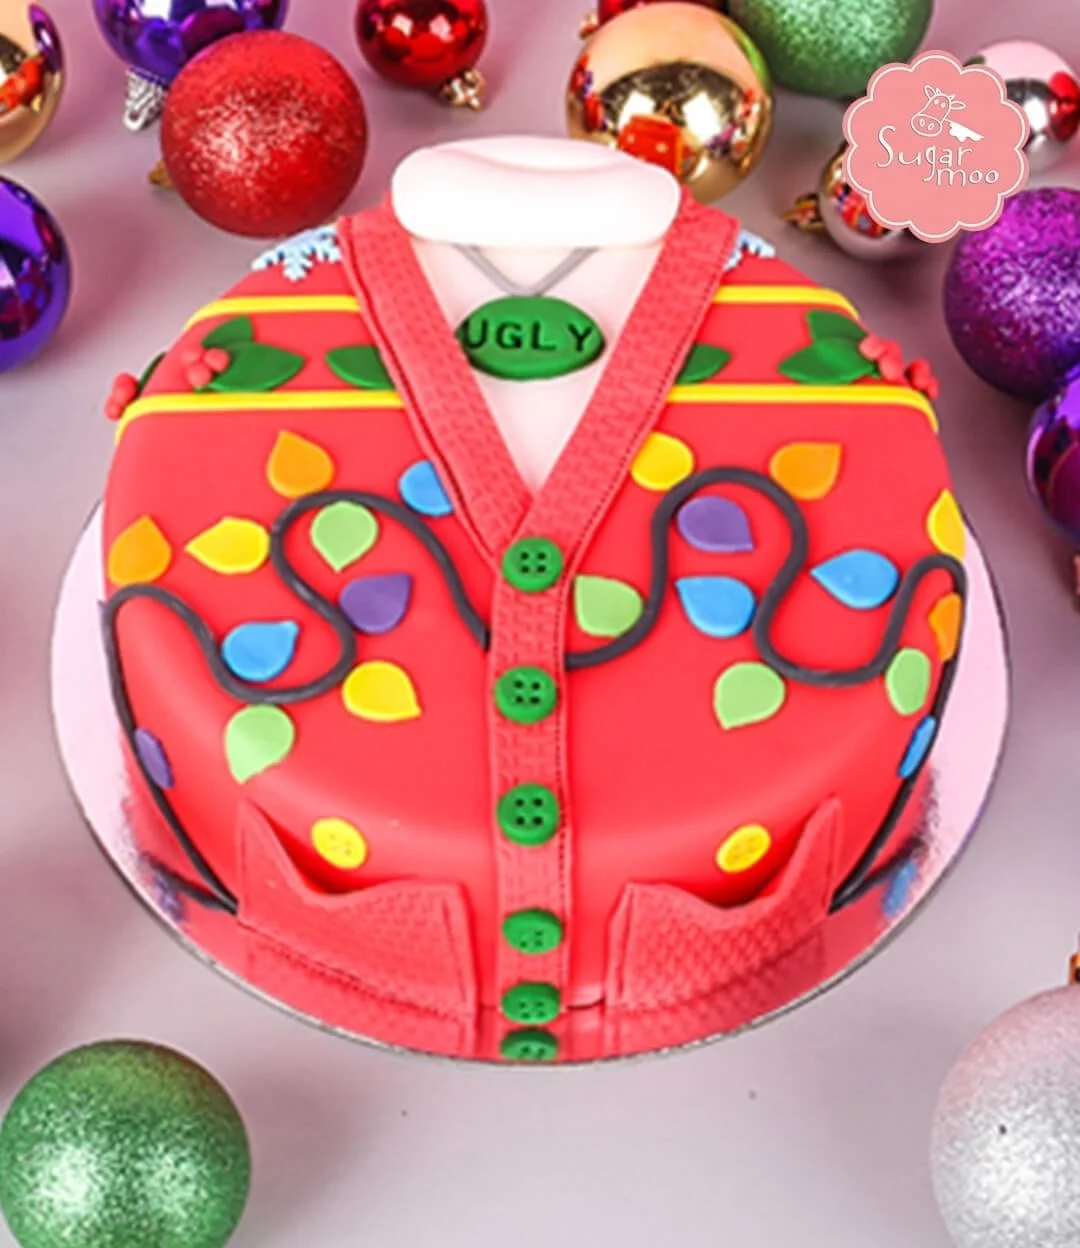 Ugly Sweater Christmas Party Cake by Sugarmoo 